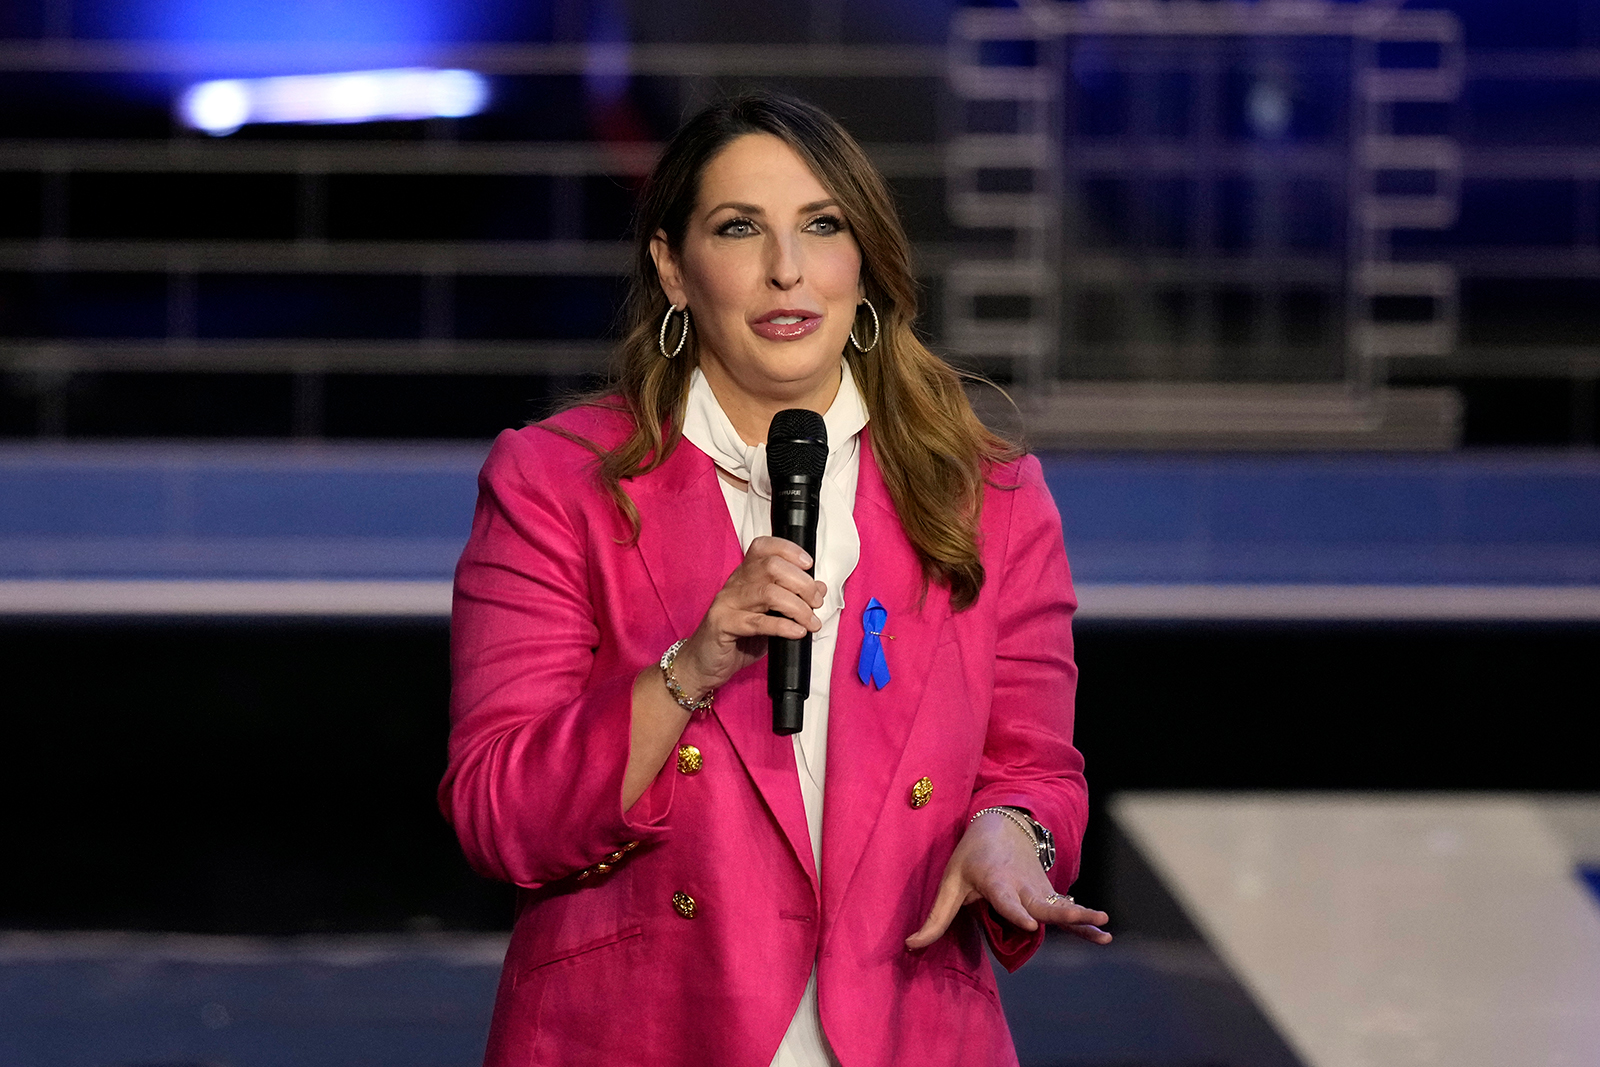 Ronna McDaniel speaks before a Republican presidential primary debate hosted by NBC News, in Miami on Wednesday 8.